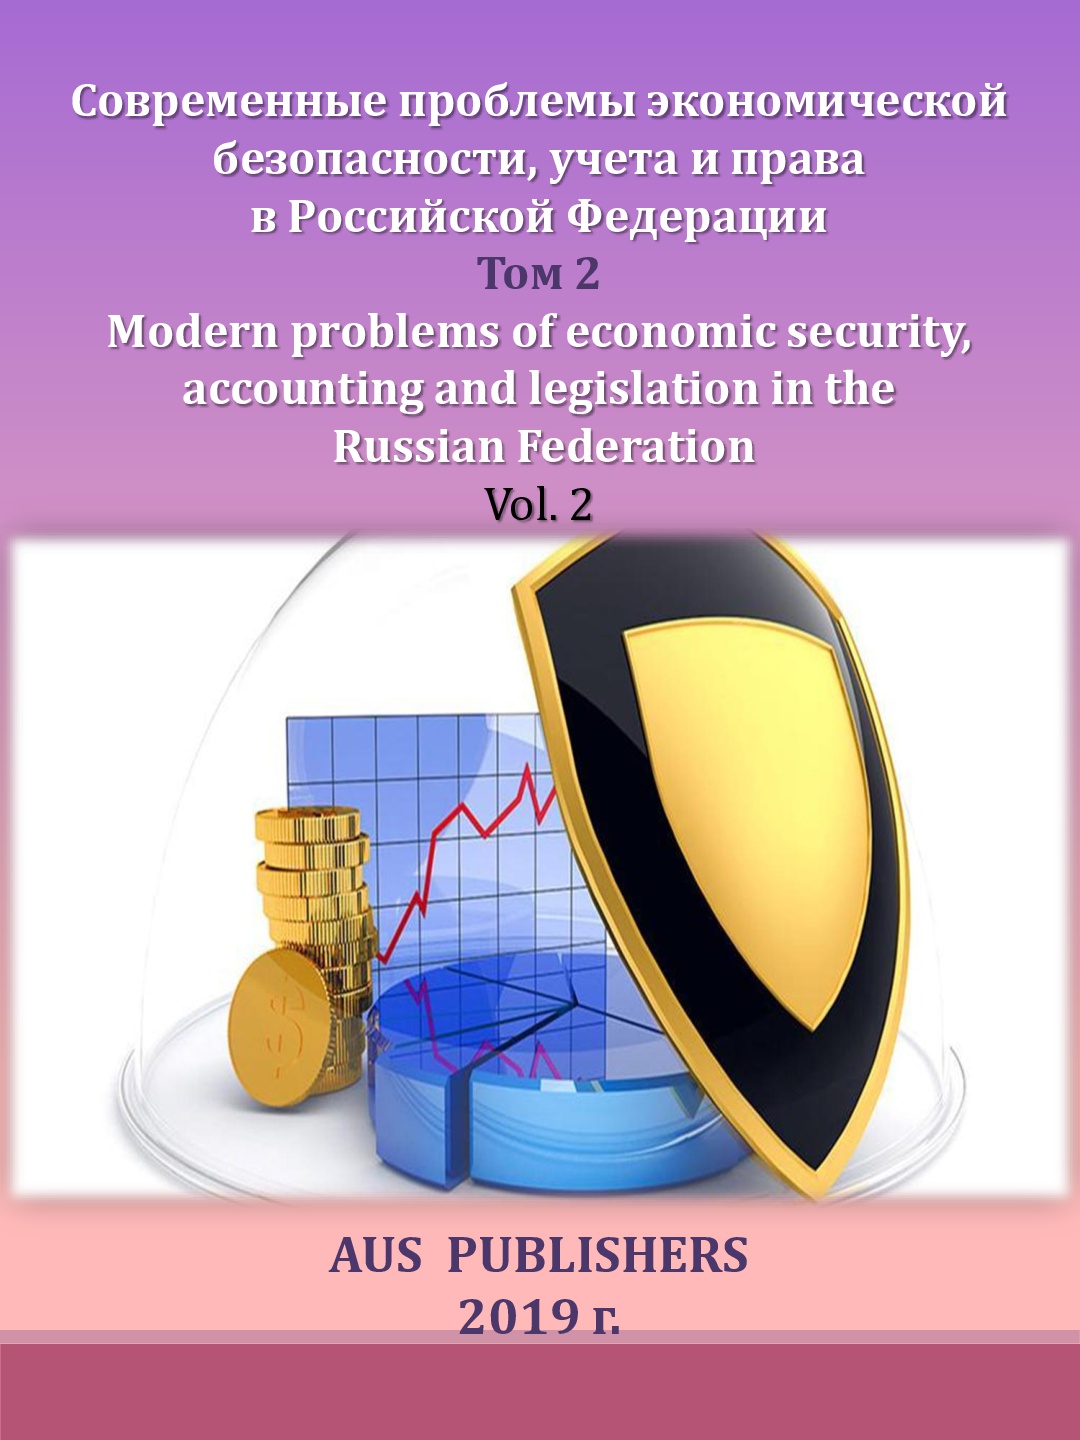                         CONTEMPORARY THREATS TO ECONOMIC SECURITY IN THE RUSSIAN FEDERATION
            